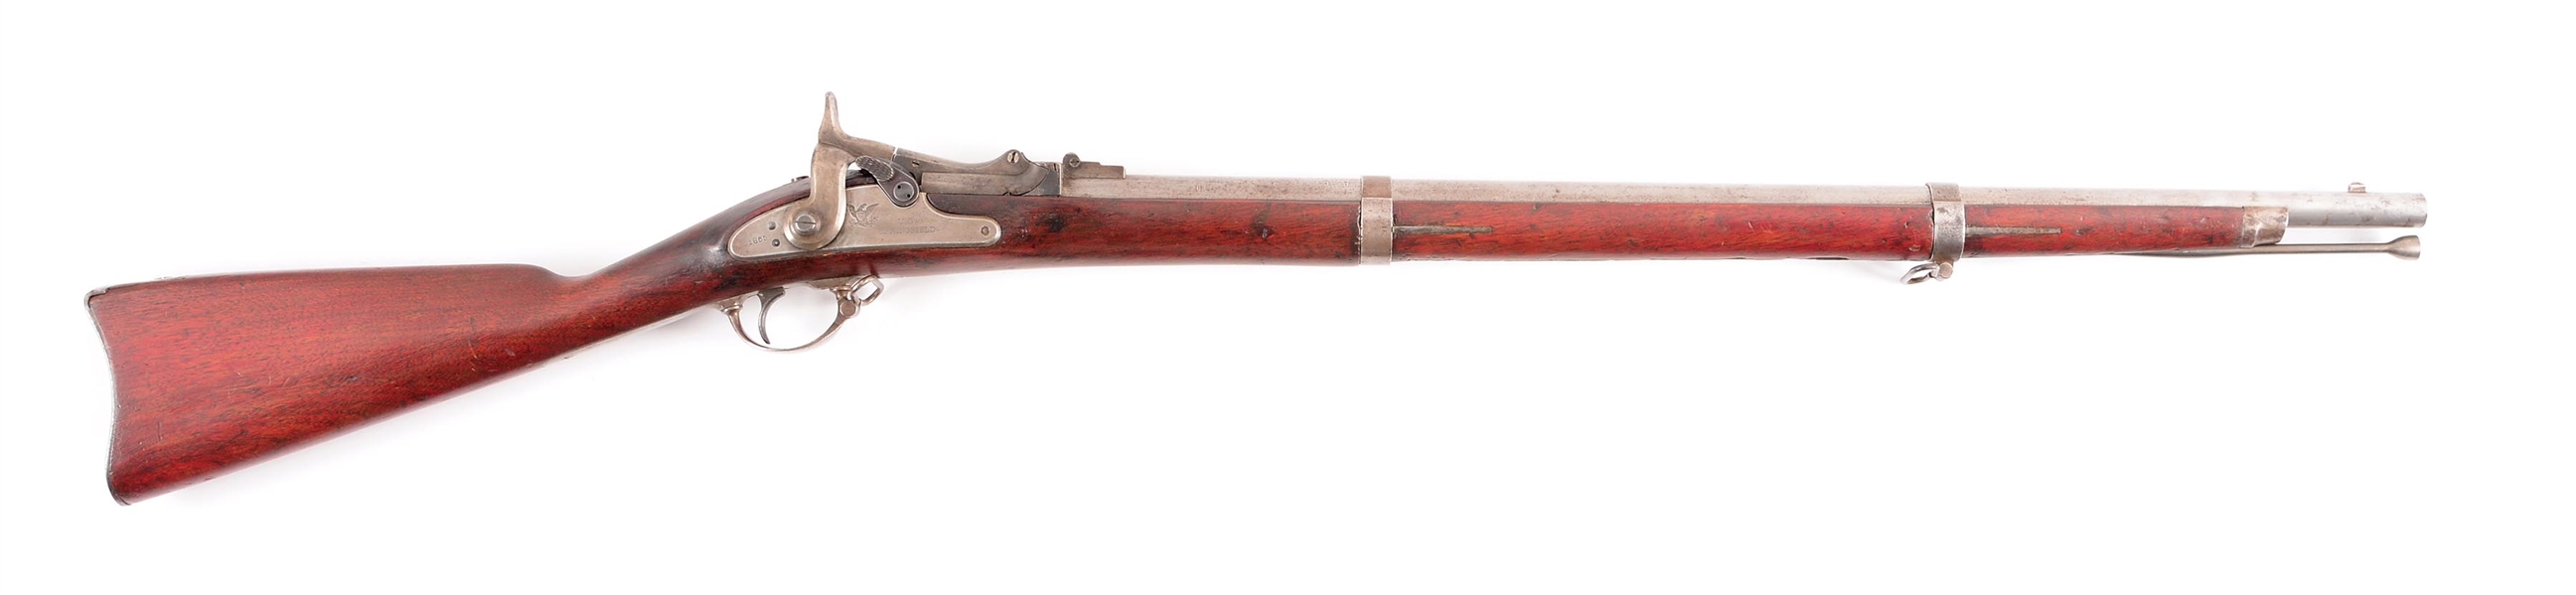 (A) US SPRINGFIELD MODEL 1865 FIRST ALLIN CONVERSION TRAPDOOR RIFLE.